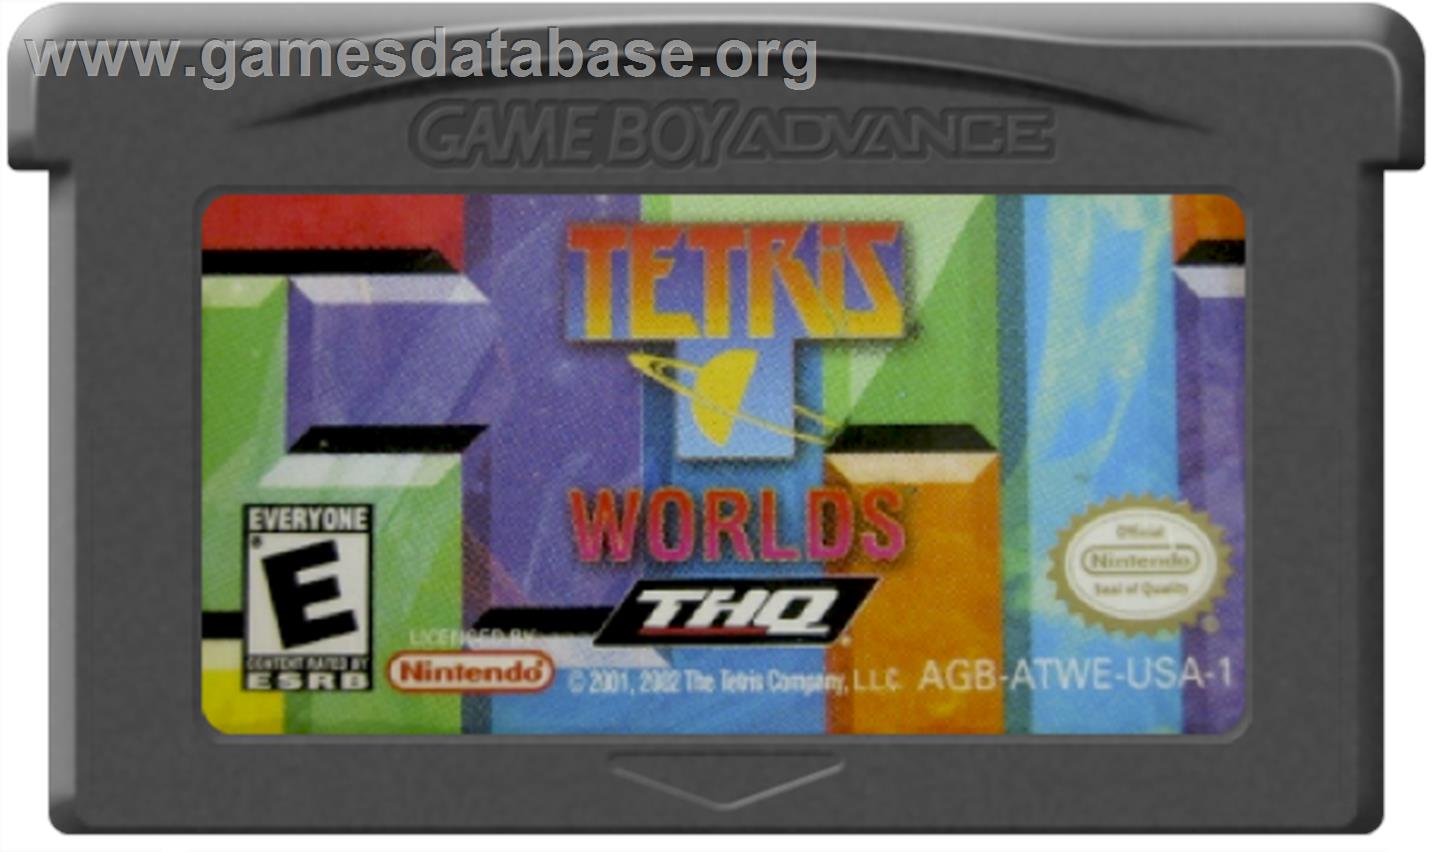 Out of This World - Nintendo Game Boy Advance - Artwork - Cartridge